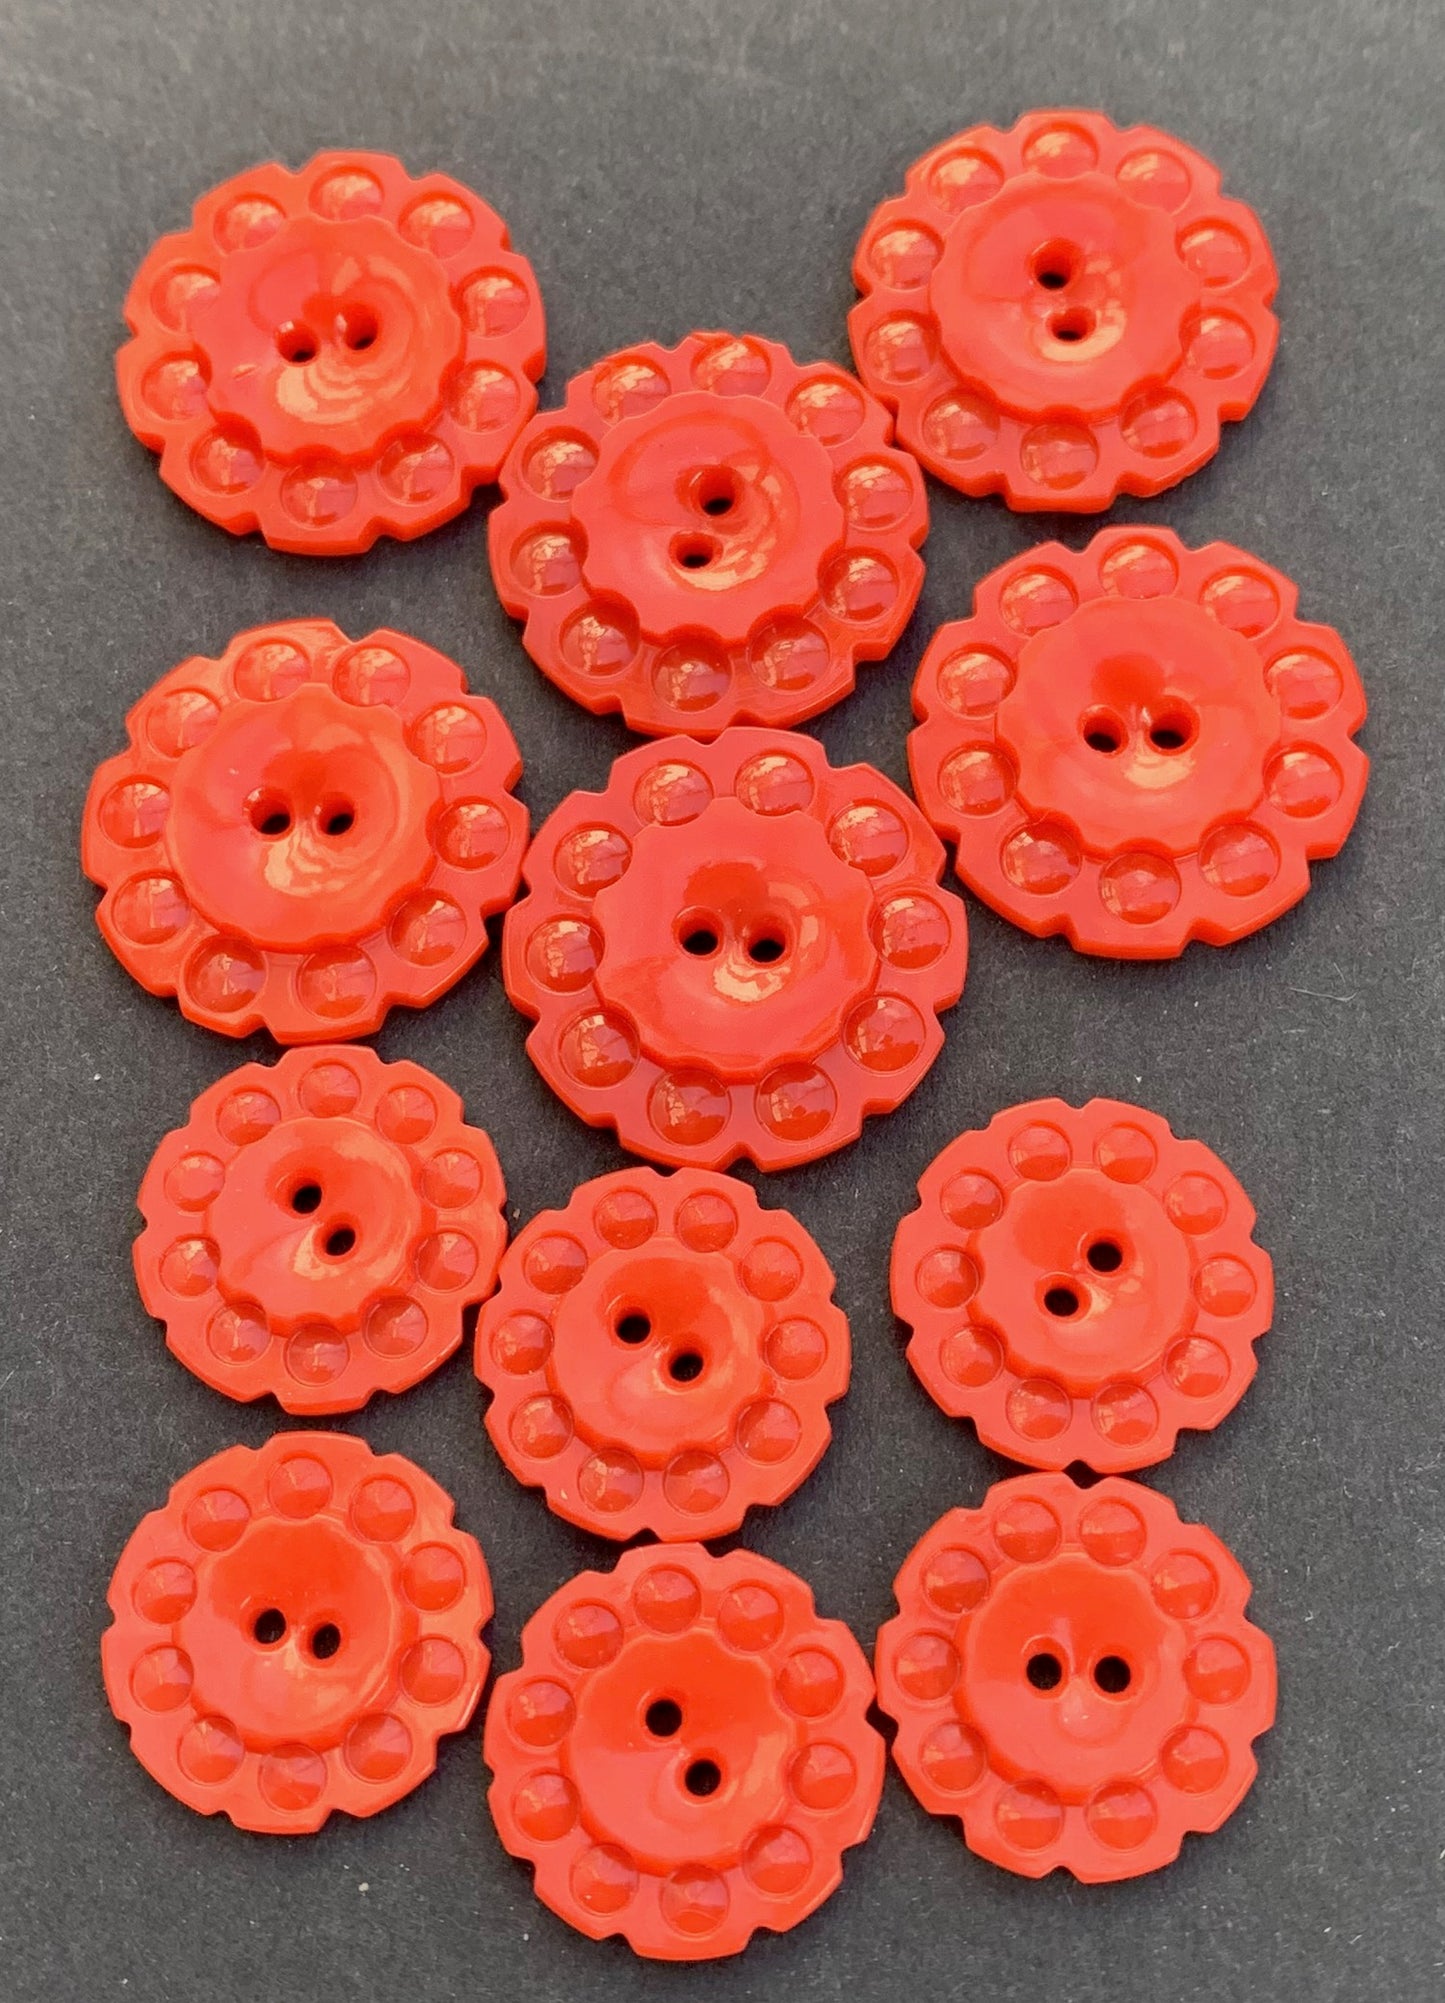 6 Soft Red vintage  Buttons - 1.7cm or 2.2cm